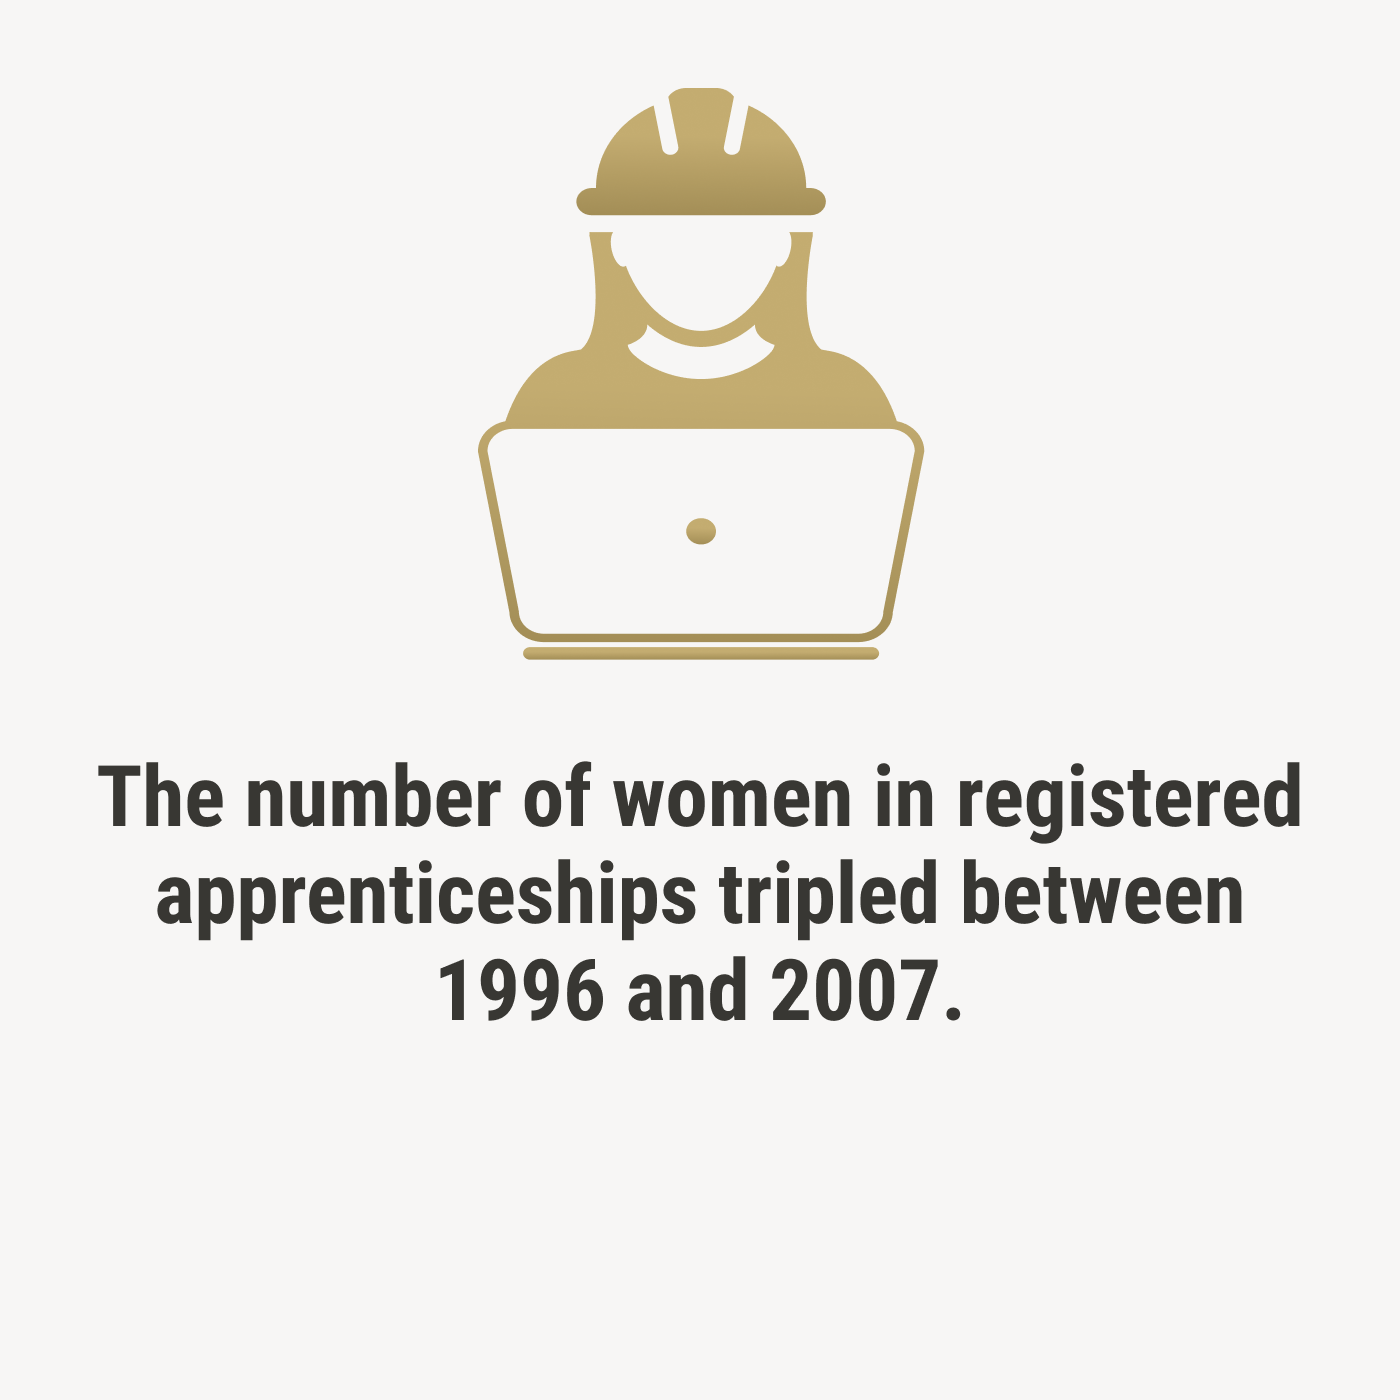 number of women in registered apprenticeships tripled between 1996 and 2007